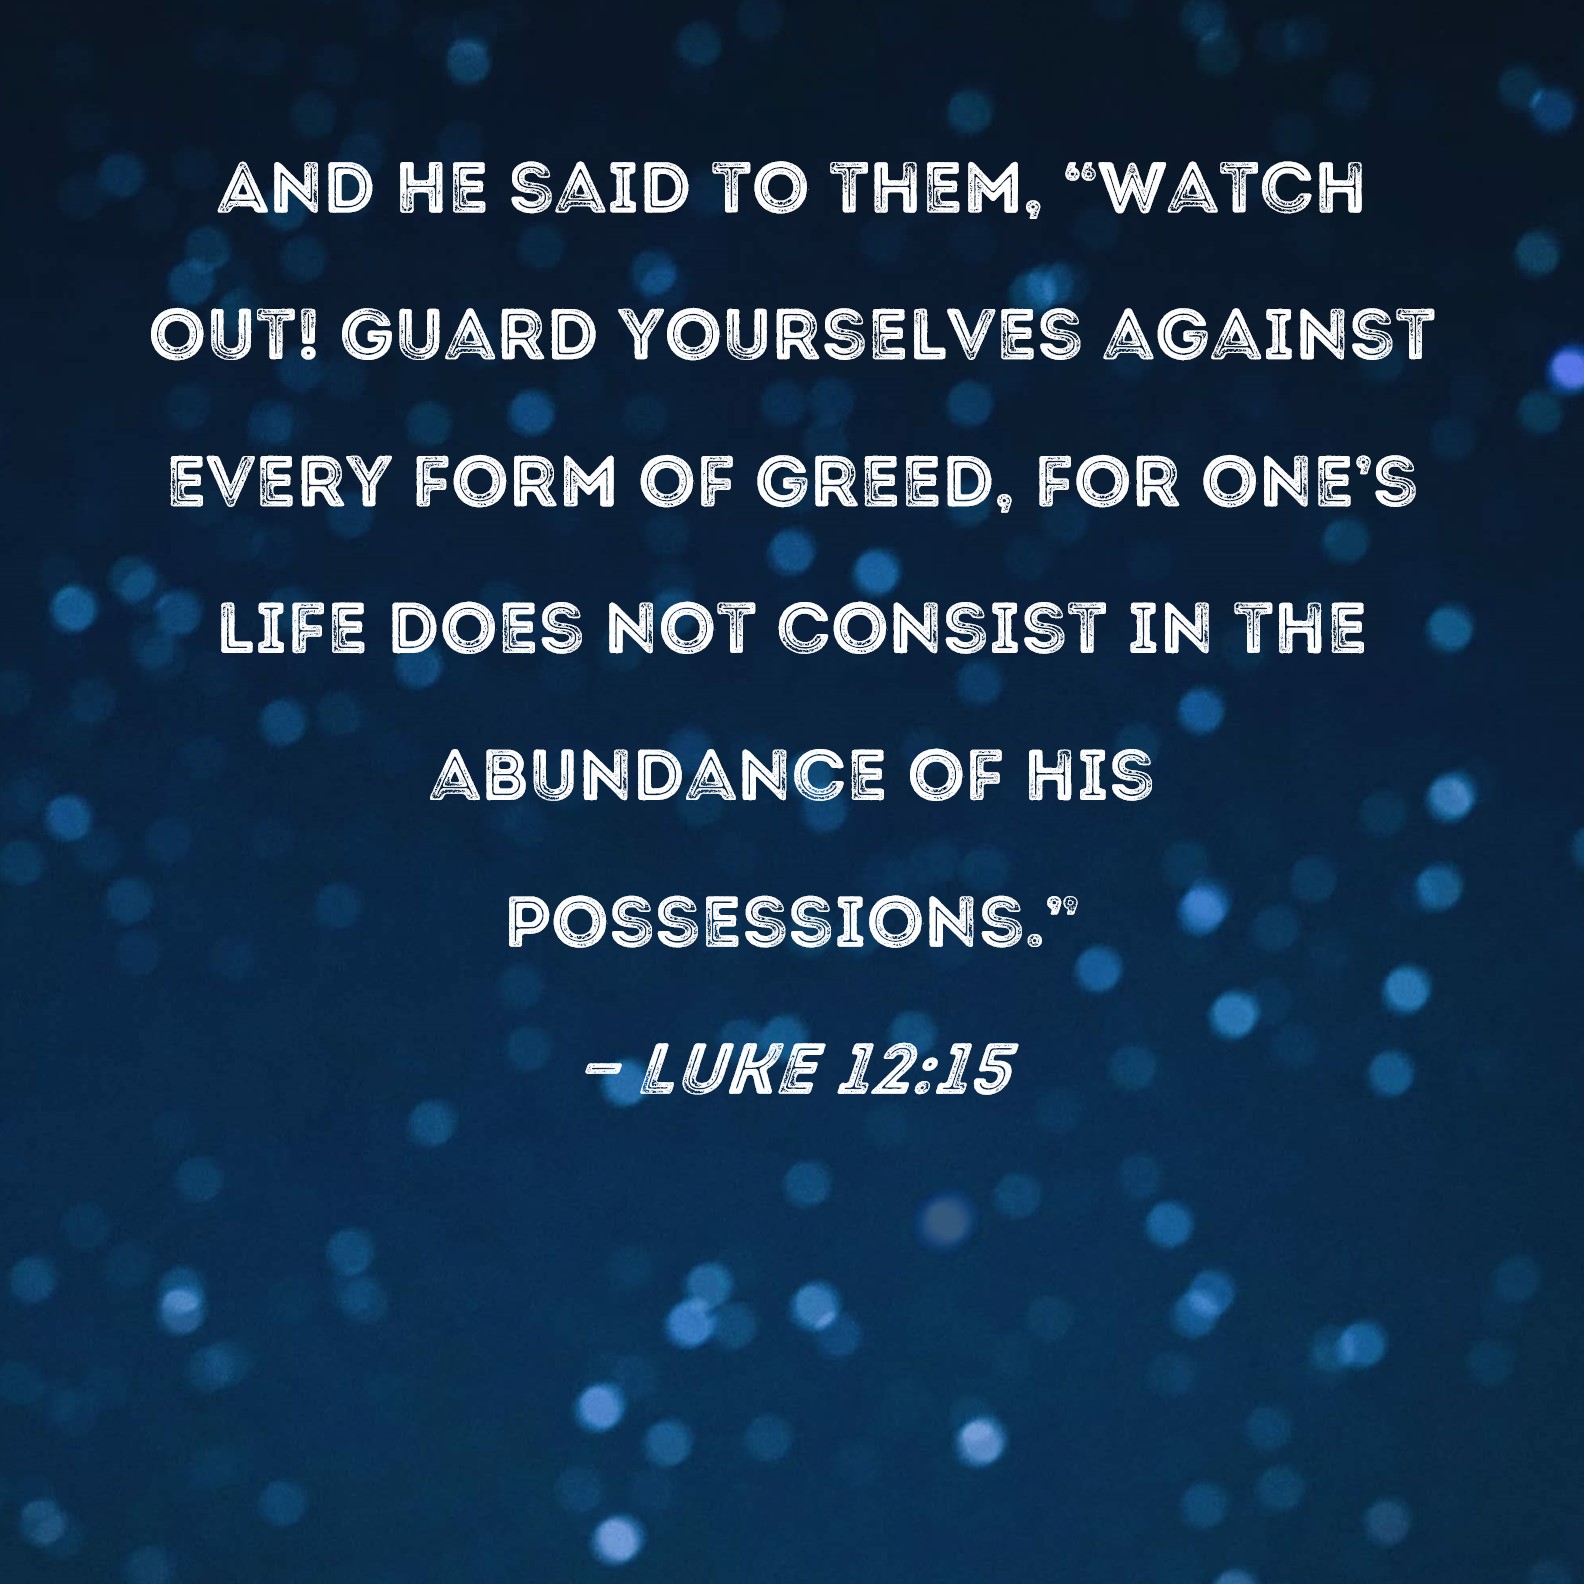 Luke 12:15 And He said to them, "Watch out! Guard yourselves against every  form of greed, for one's life does not consist in the abundance of his  possessions."